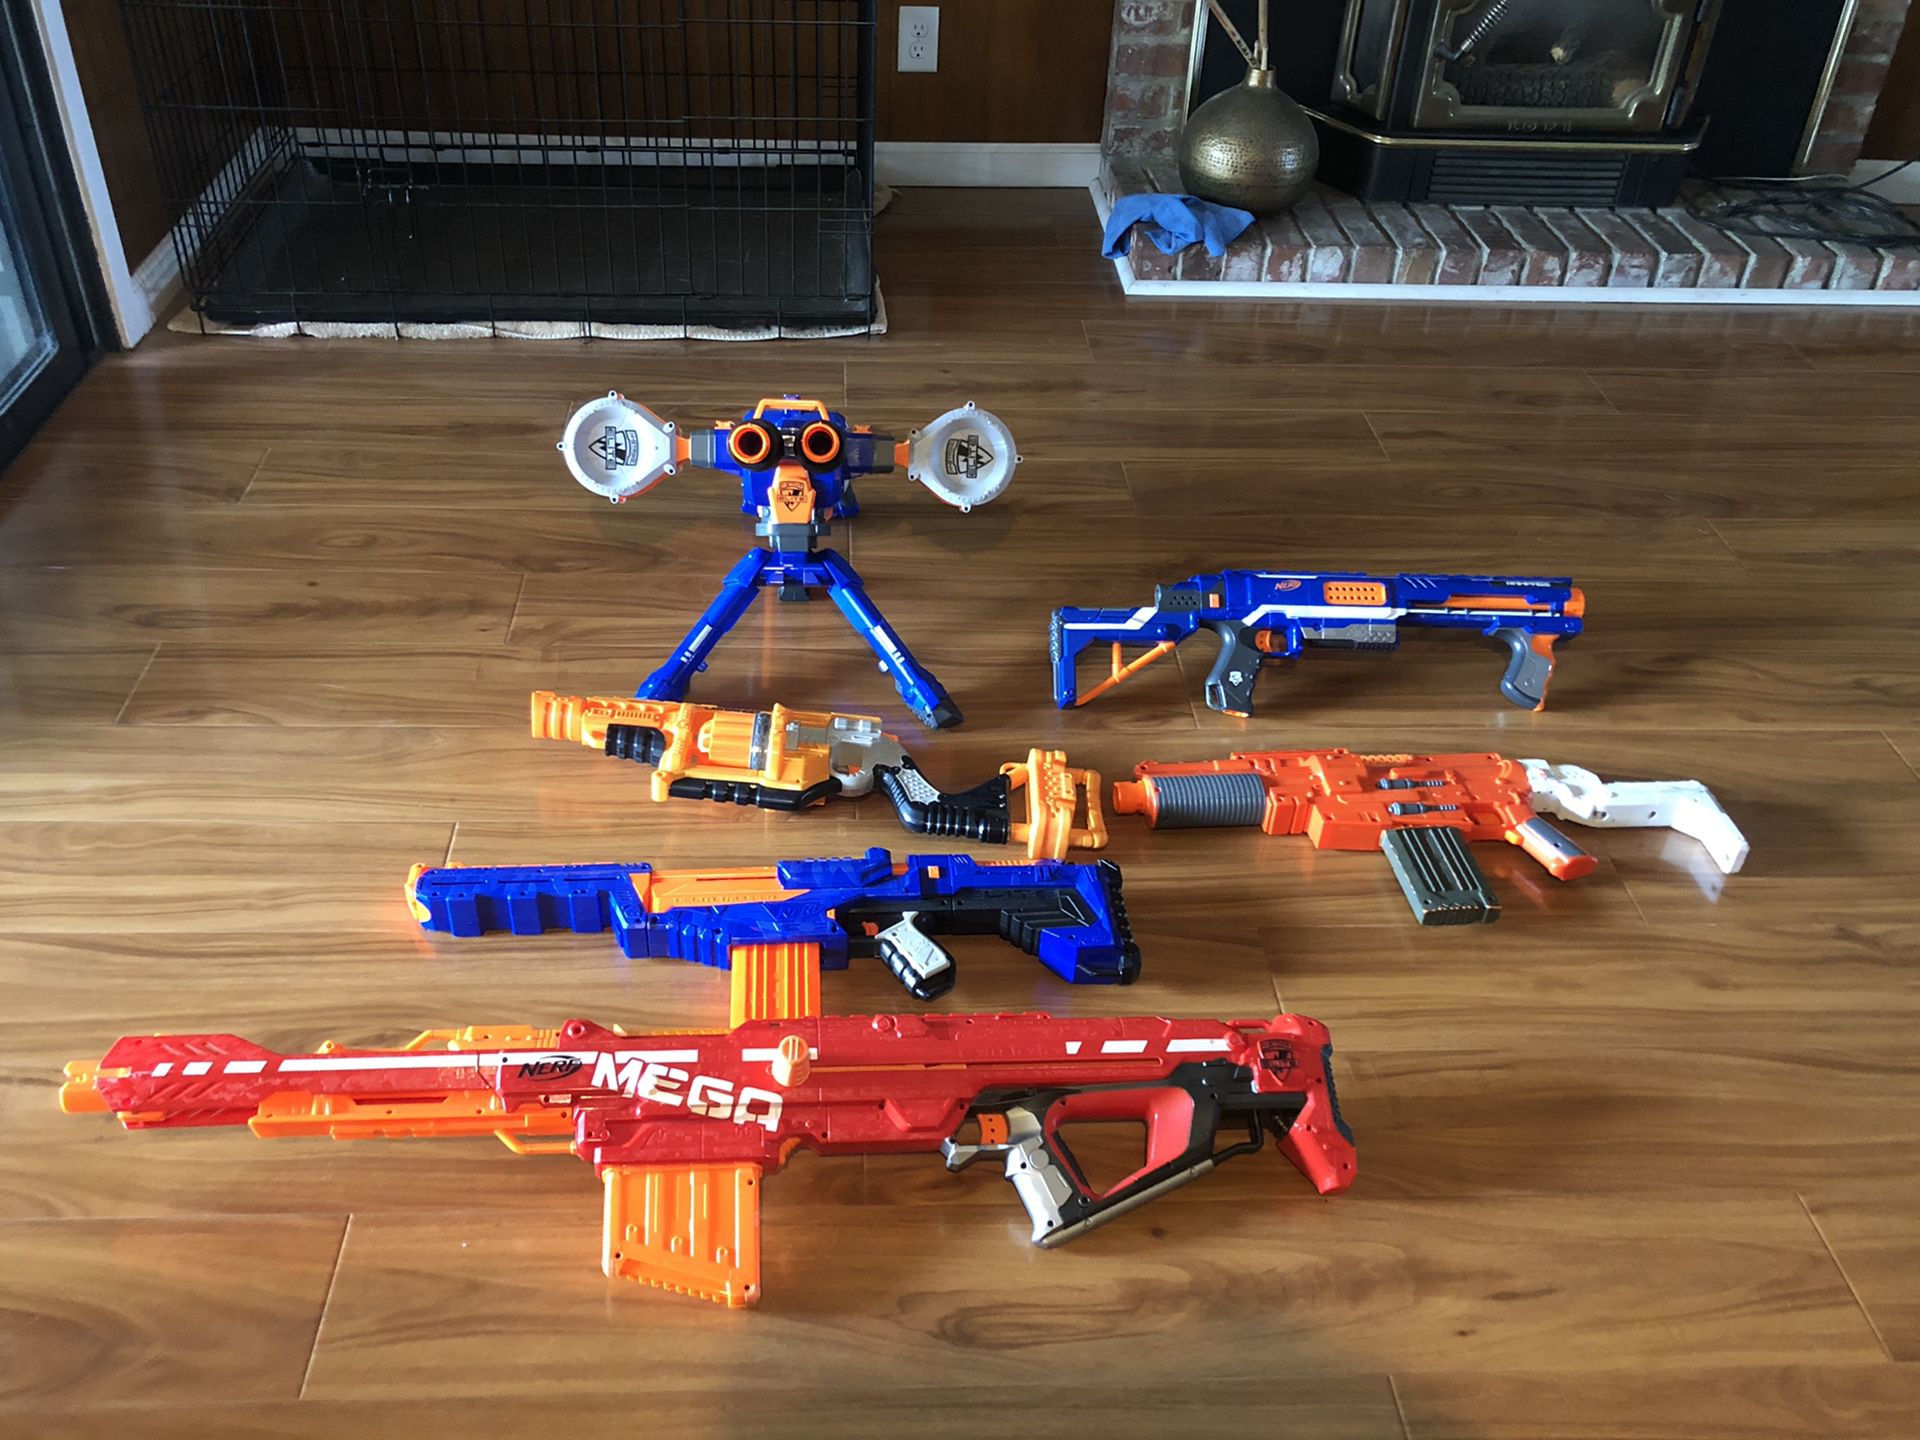 All this nurf guns for 160